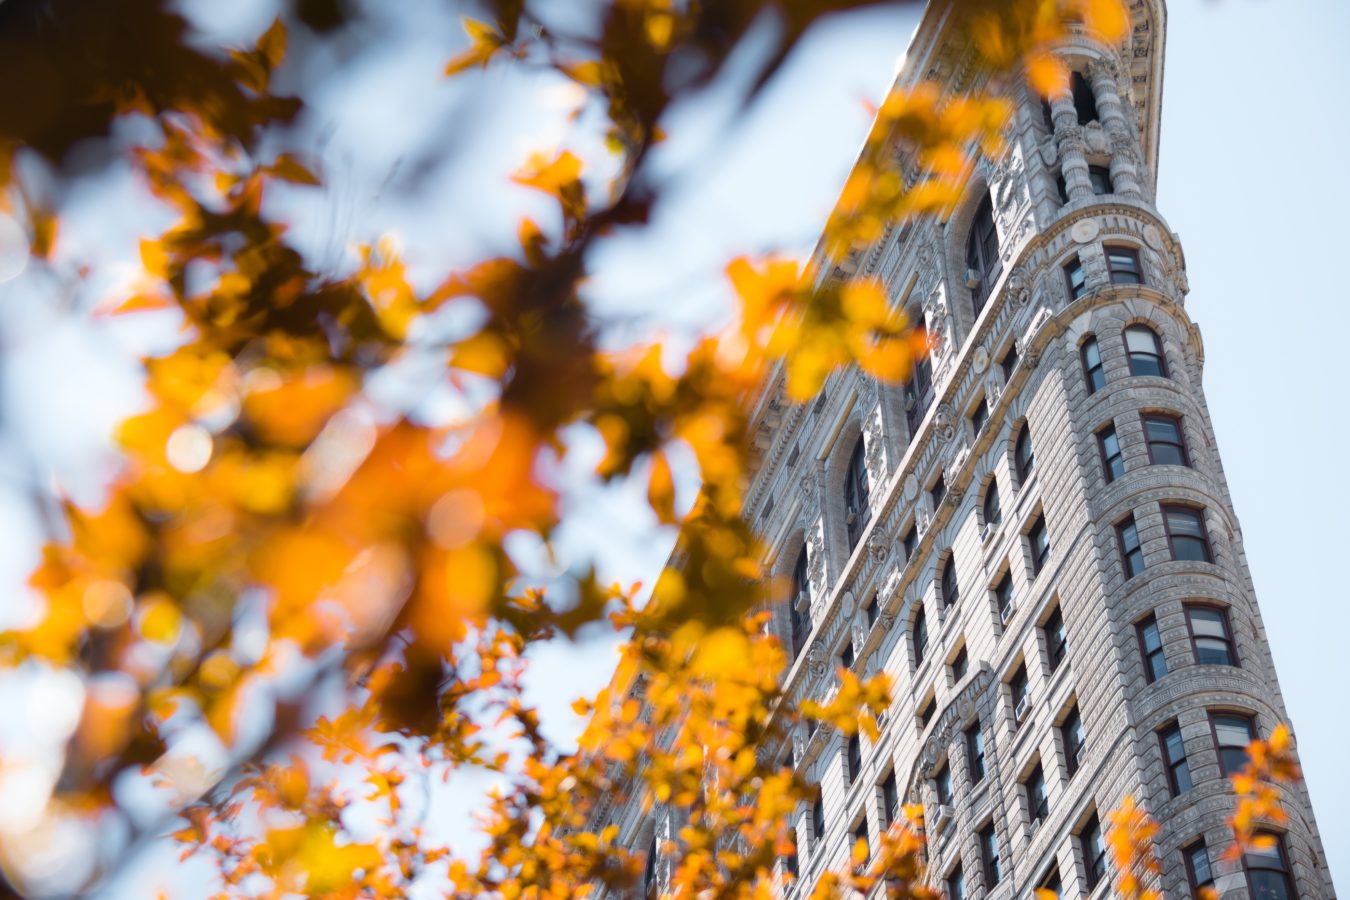 Flatiron building in New York City framed by a branch of fall leaves in the foreground